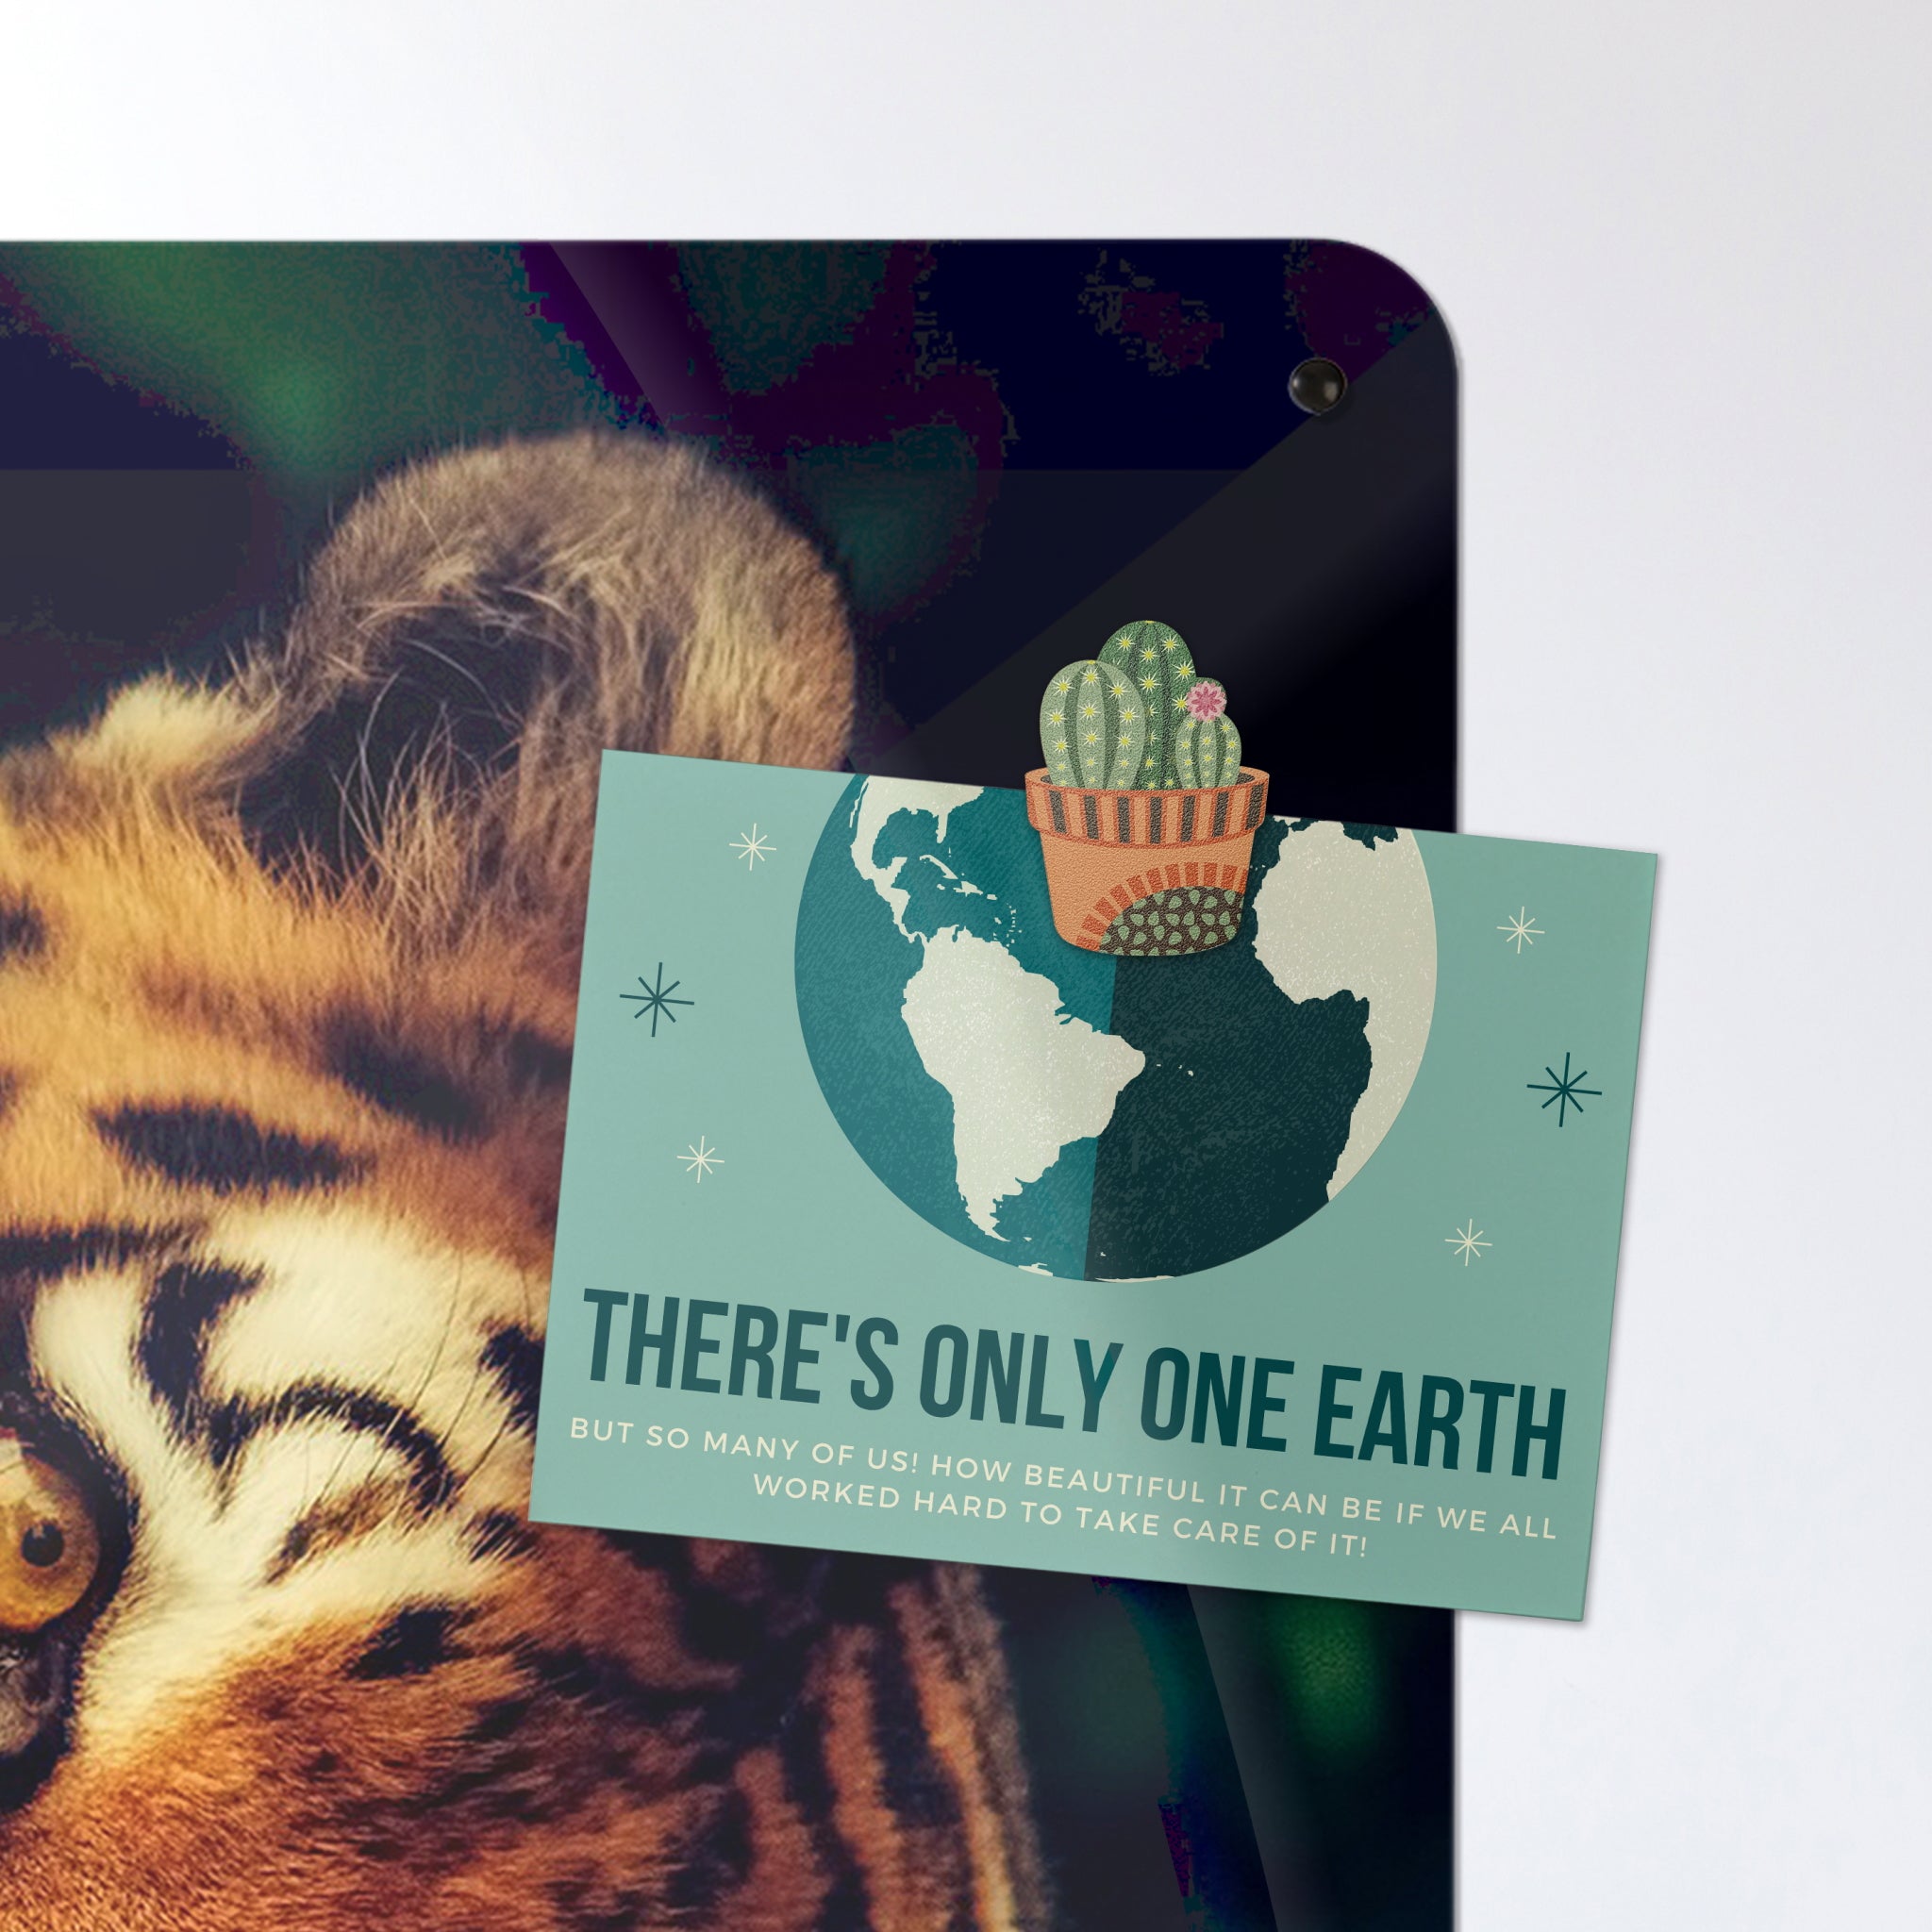 A postcard attached with a cactus design fridge magnet on a tiger photographic magnetic board or metal wall art panel